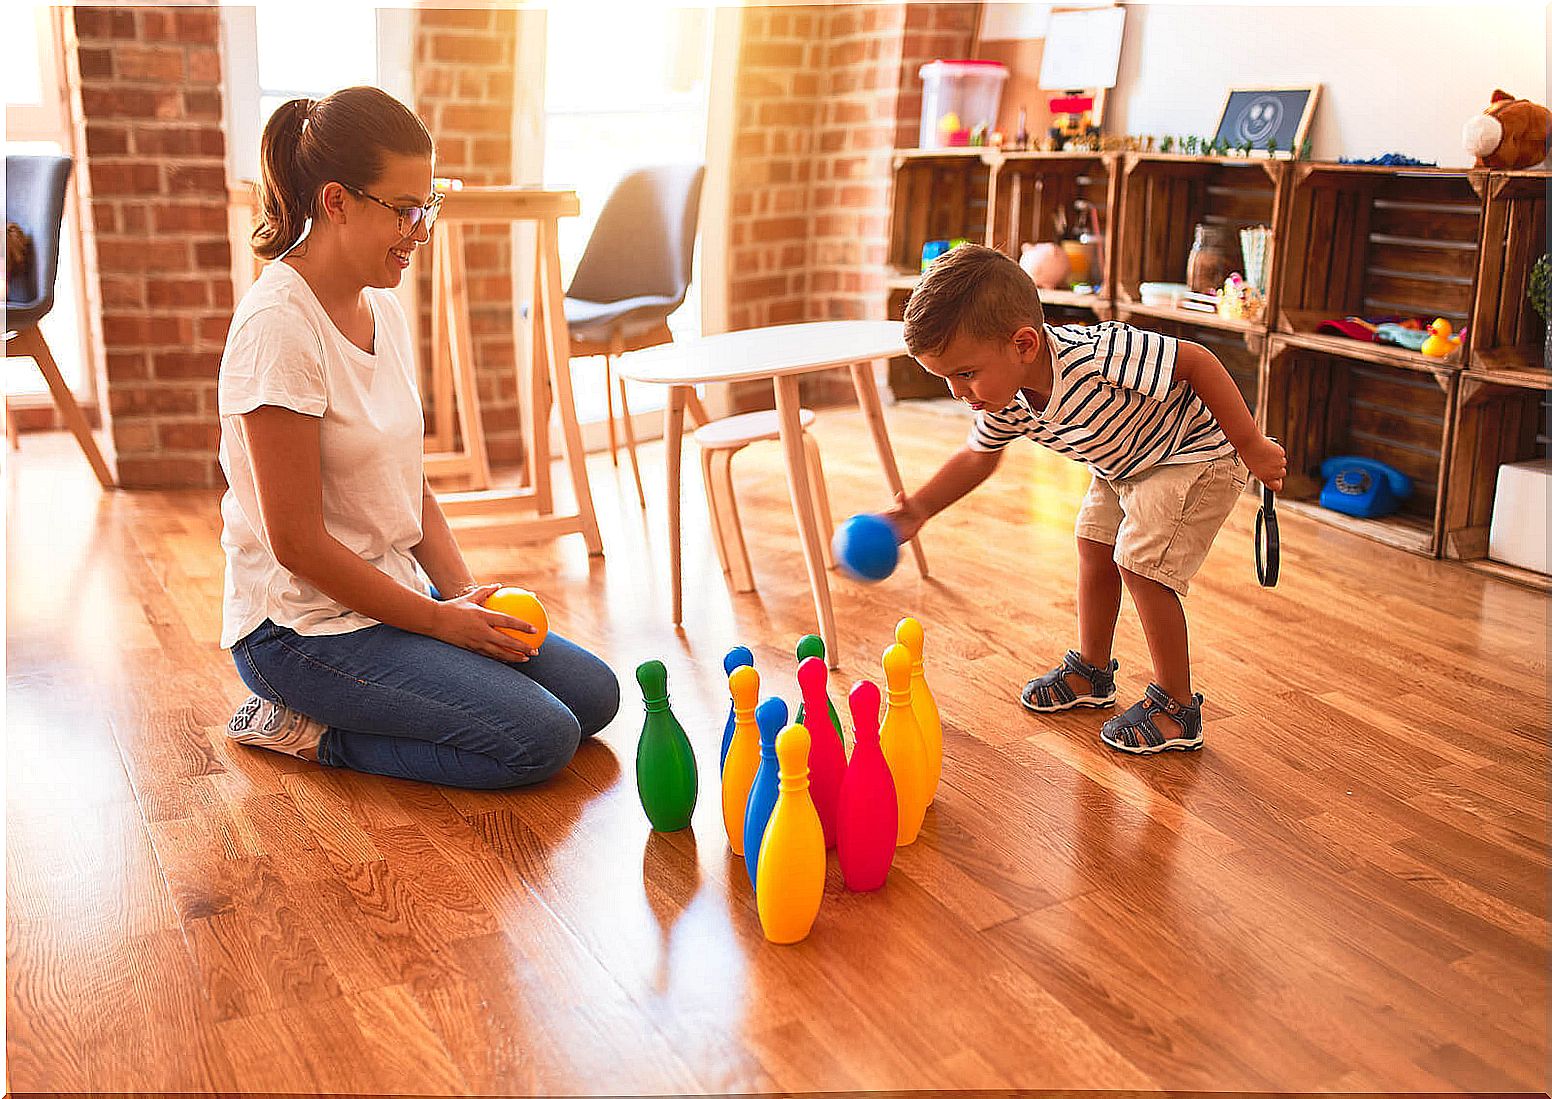 develop motor skills: children with plastic bowling pins